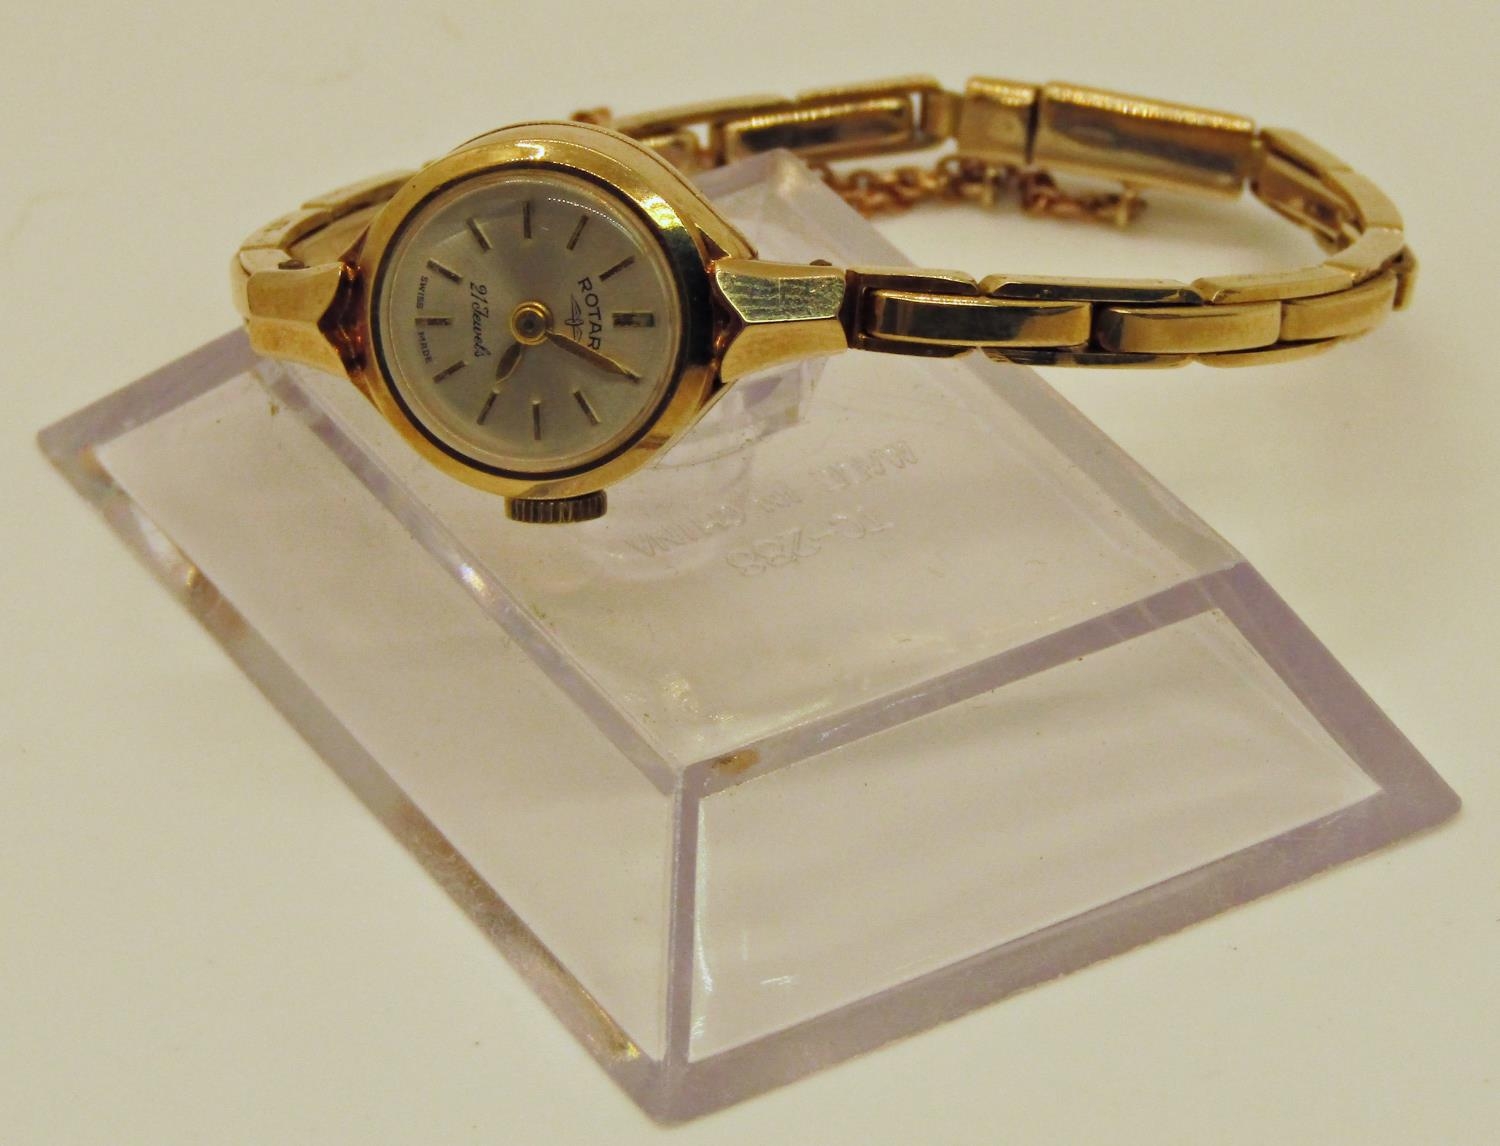 Rotary ladies dress watch with 9ct gold case and bracelet, 13gms all in